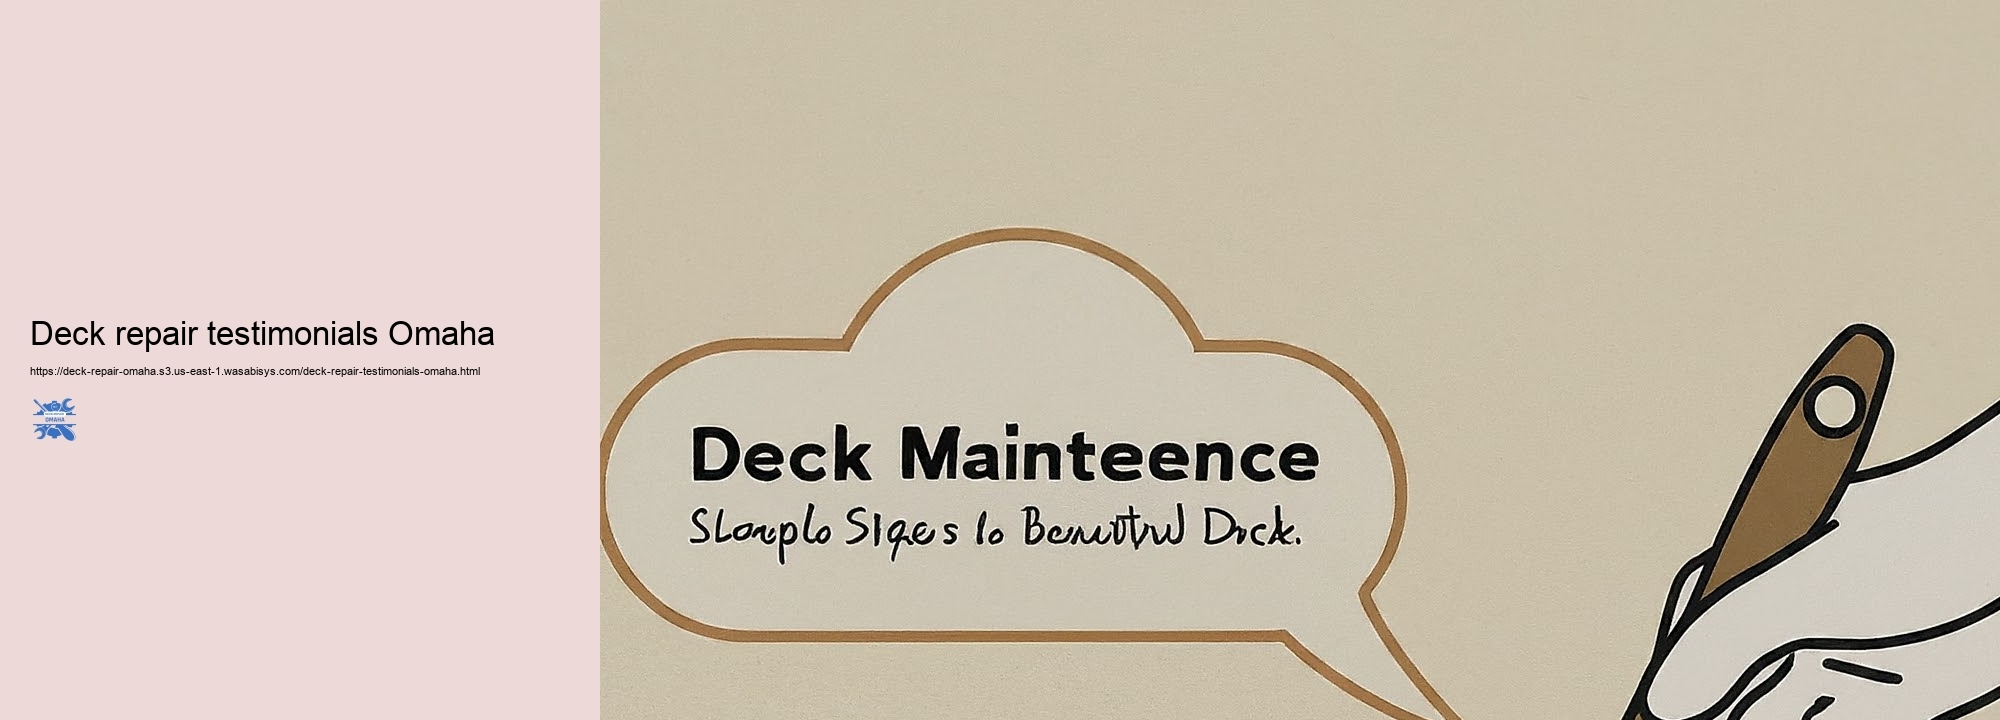 Affordable Deck Repairing Solutions for Omaha Residents